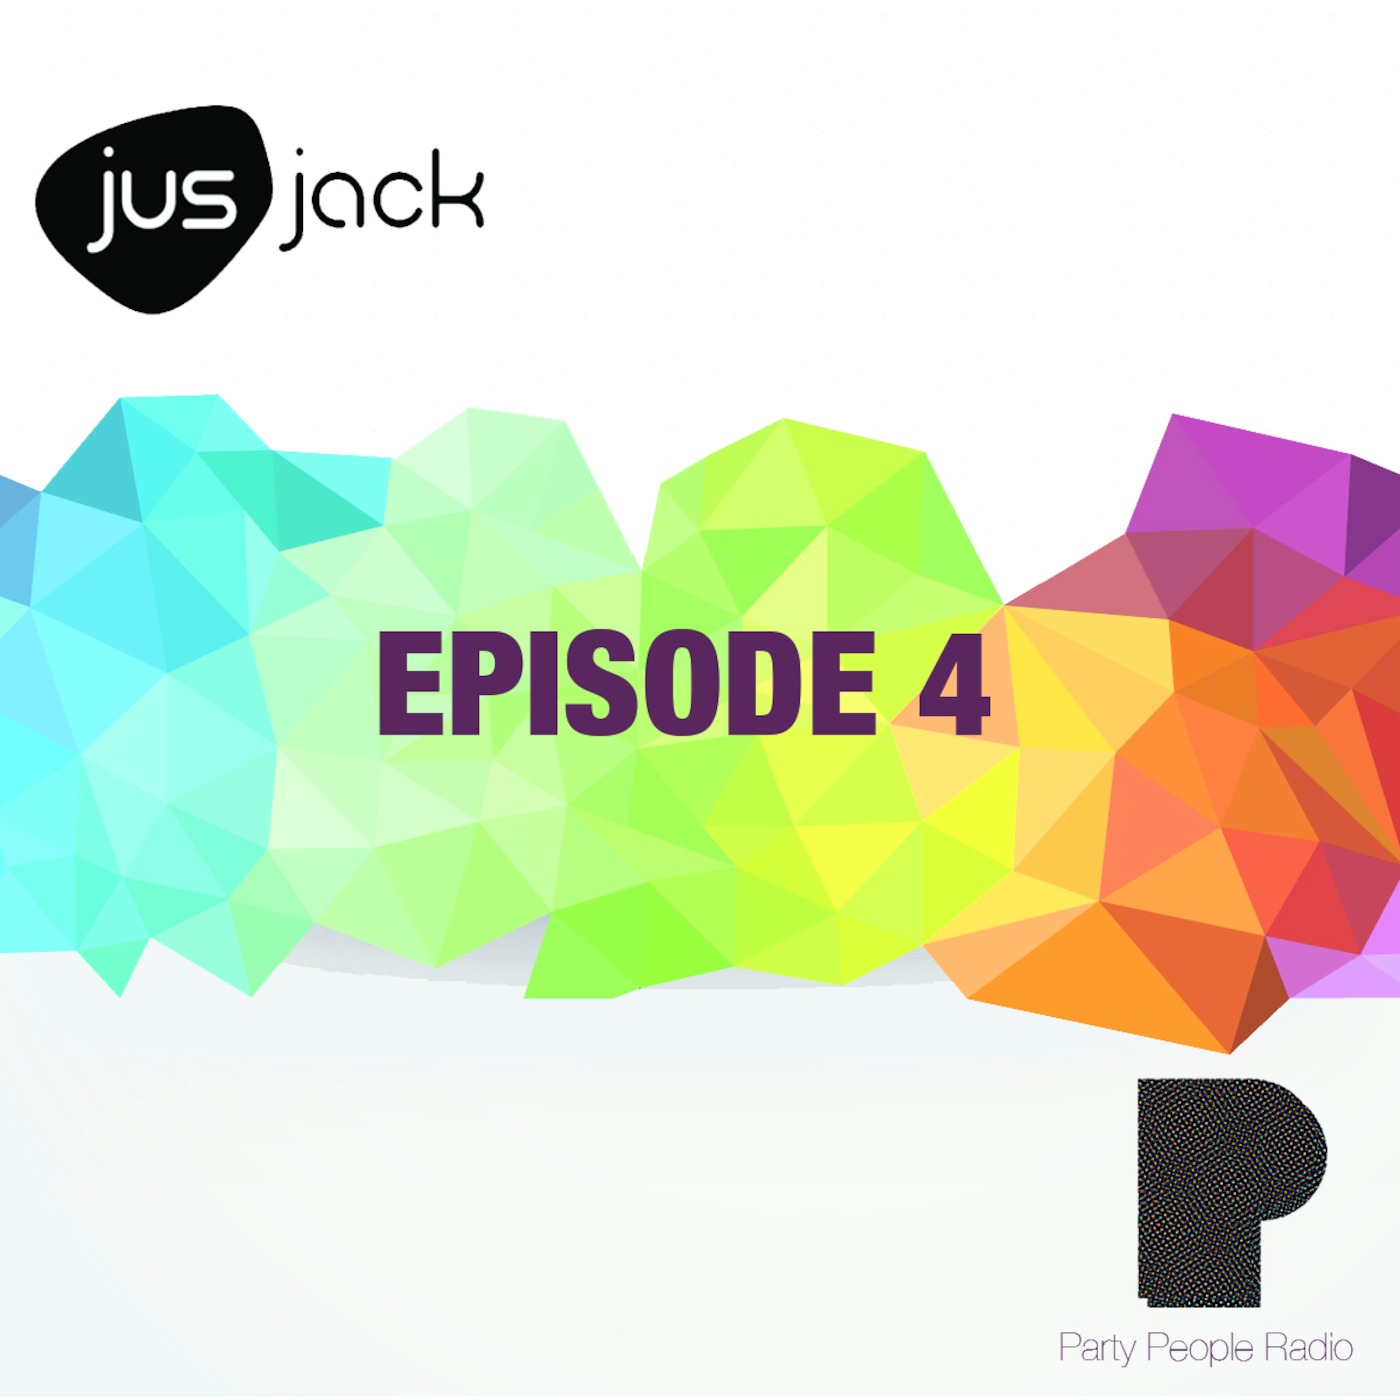 Party People Radio by Jus Jack Episode 4